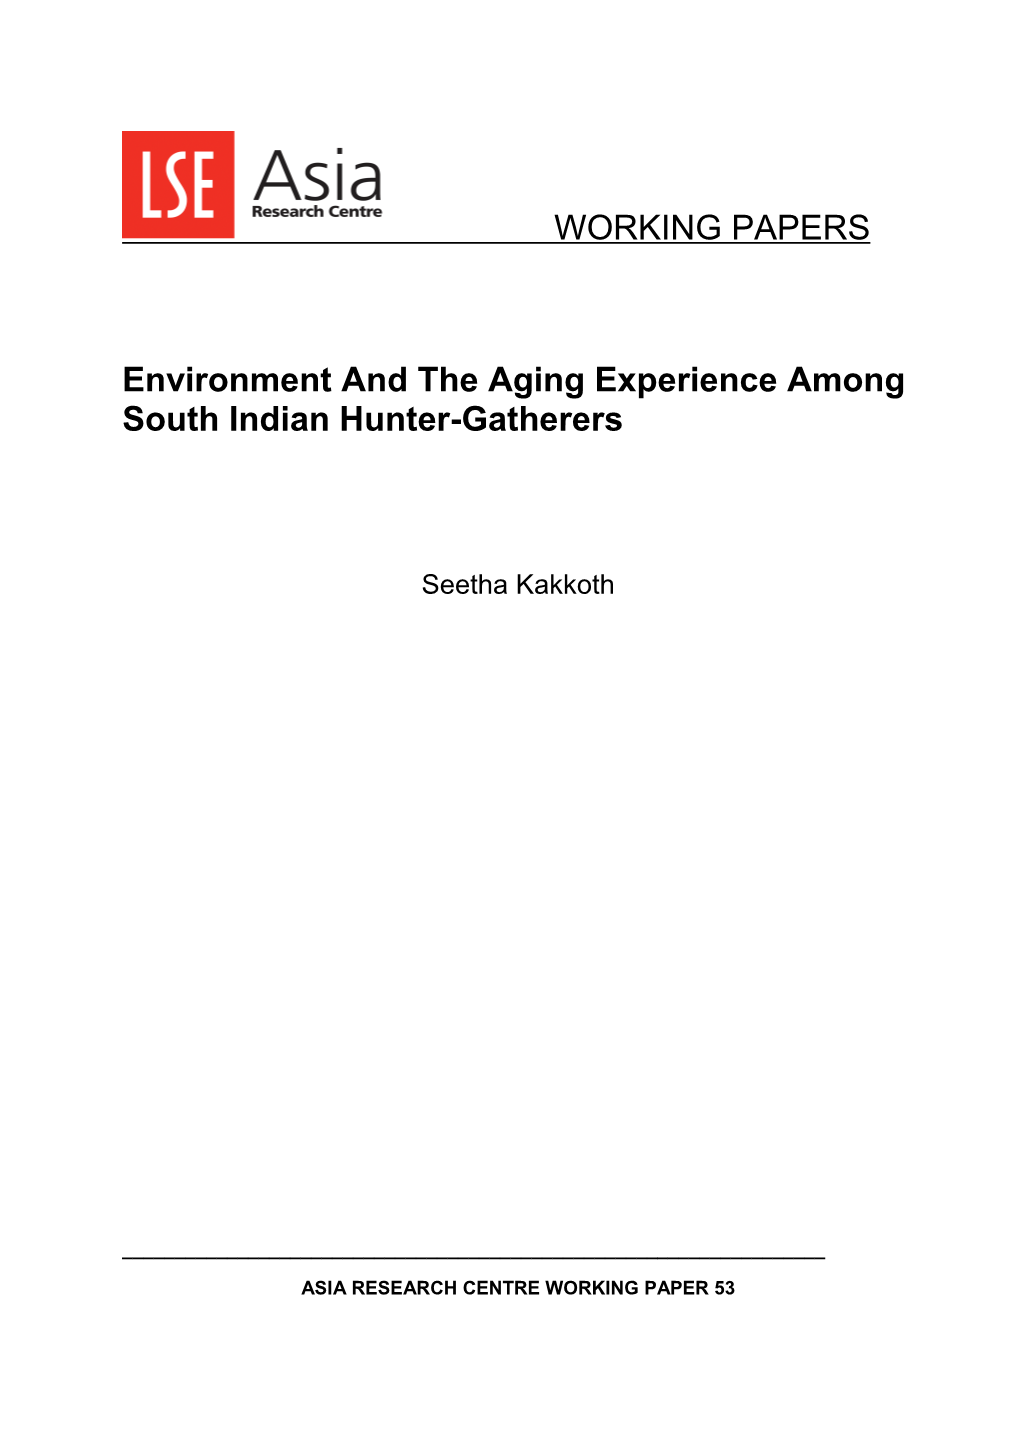 WORKING PAPERS Environment and the Aging Experience Among South Indian Hunter-Gatherers